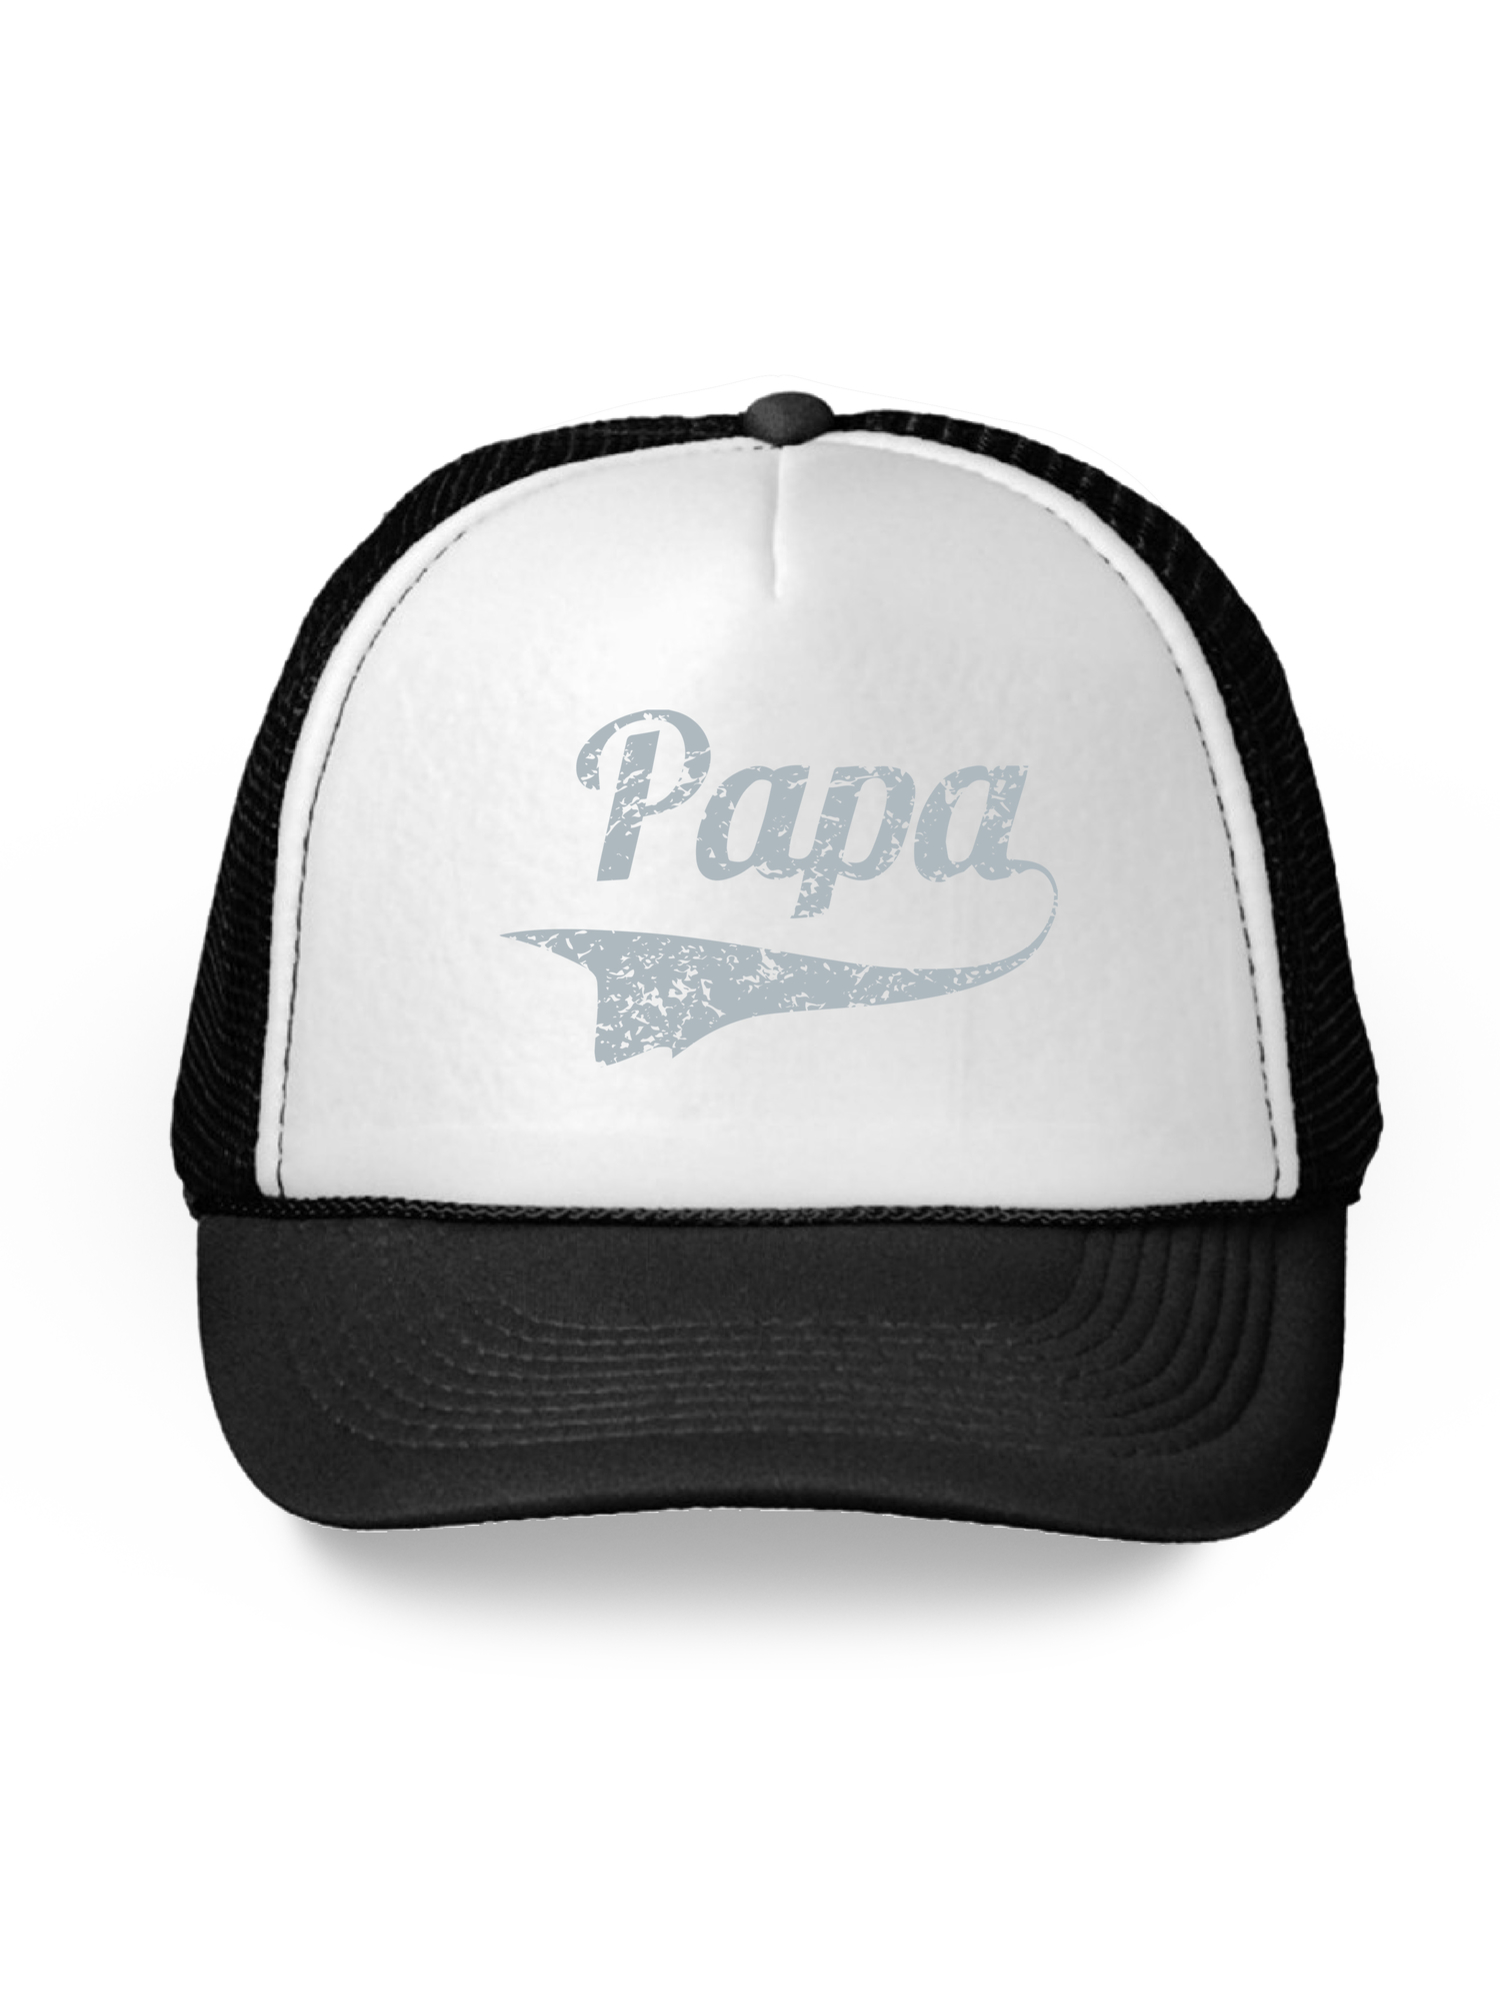 Awkward Styles Promoted To Daddy Trucker Hat New Dad Hat Funny Dad Gifts for Father's Day Baby Daddy Cap First Father's Day Pregnancy Announcement Dad 2018 Trucker Hat Daddy Snapback Hat Father Gifts - image 1 of 6